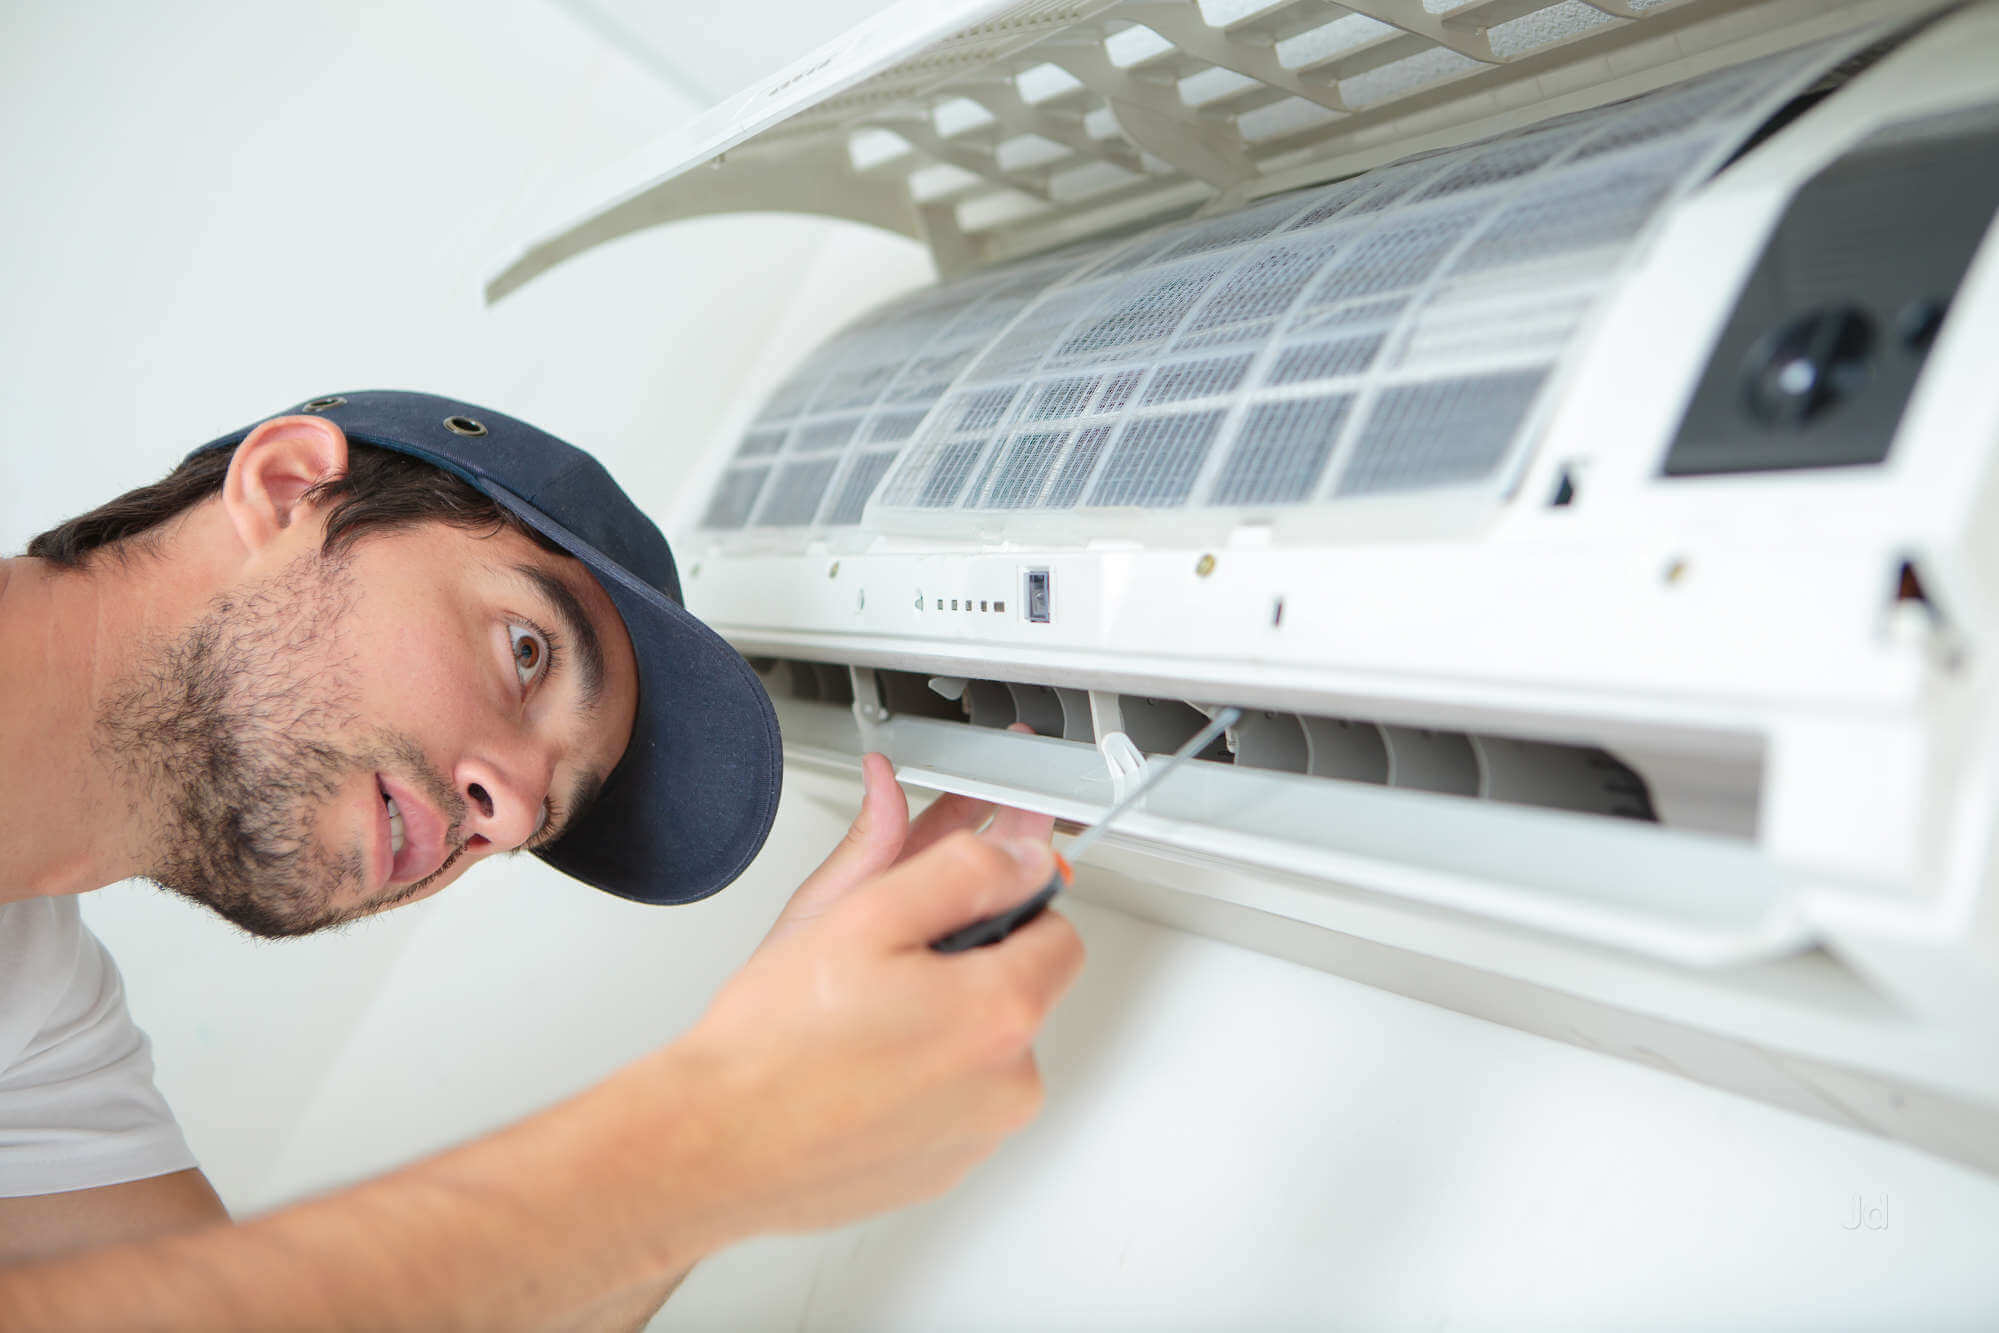 Home Air Conditioner Service